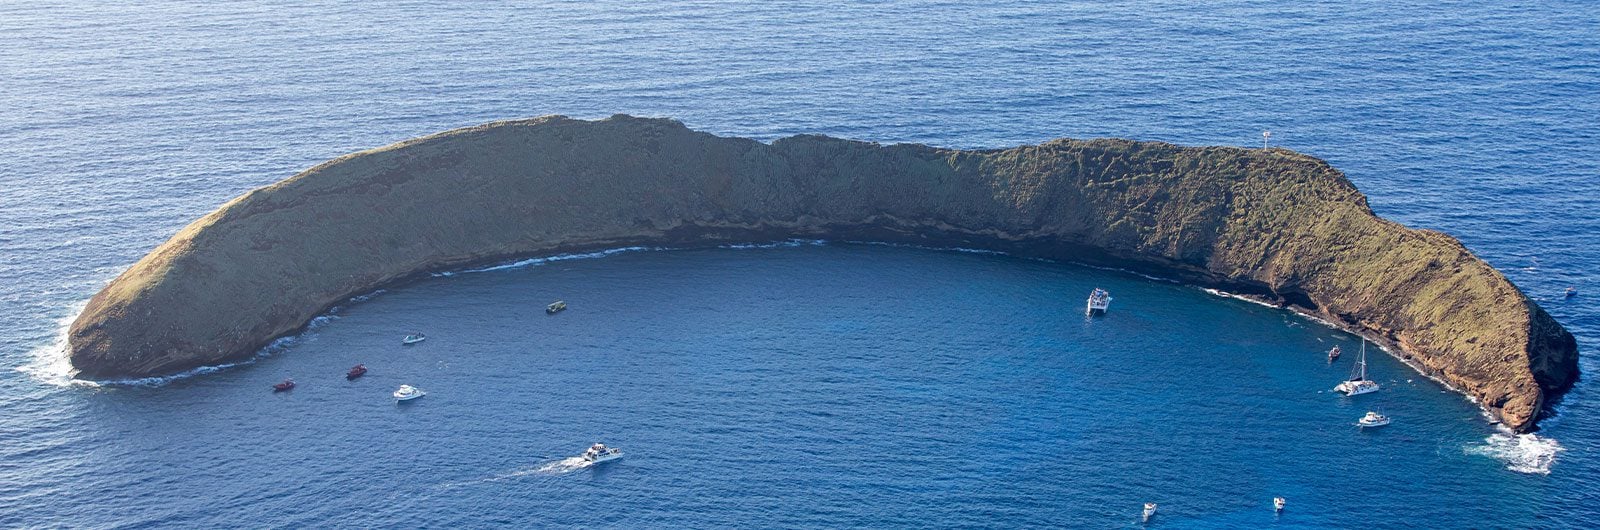 Molokini Snorkeling and Dive Spots Explained